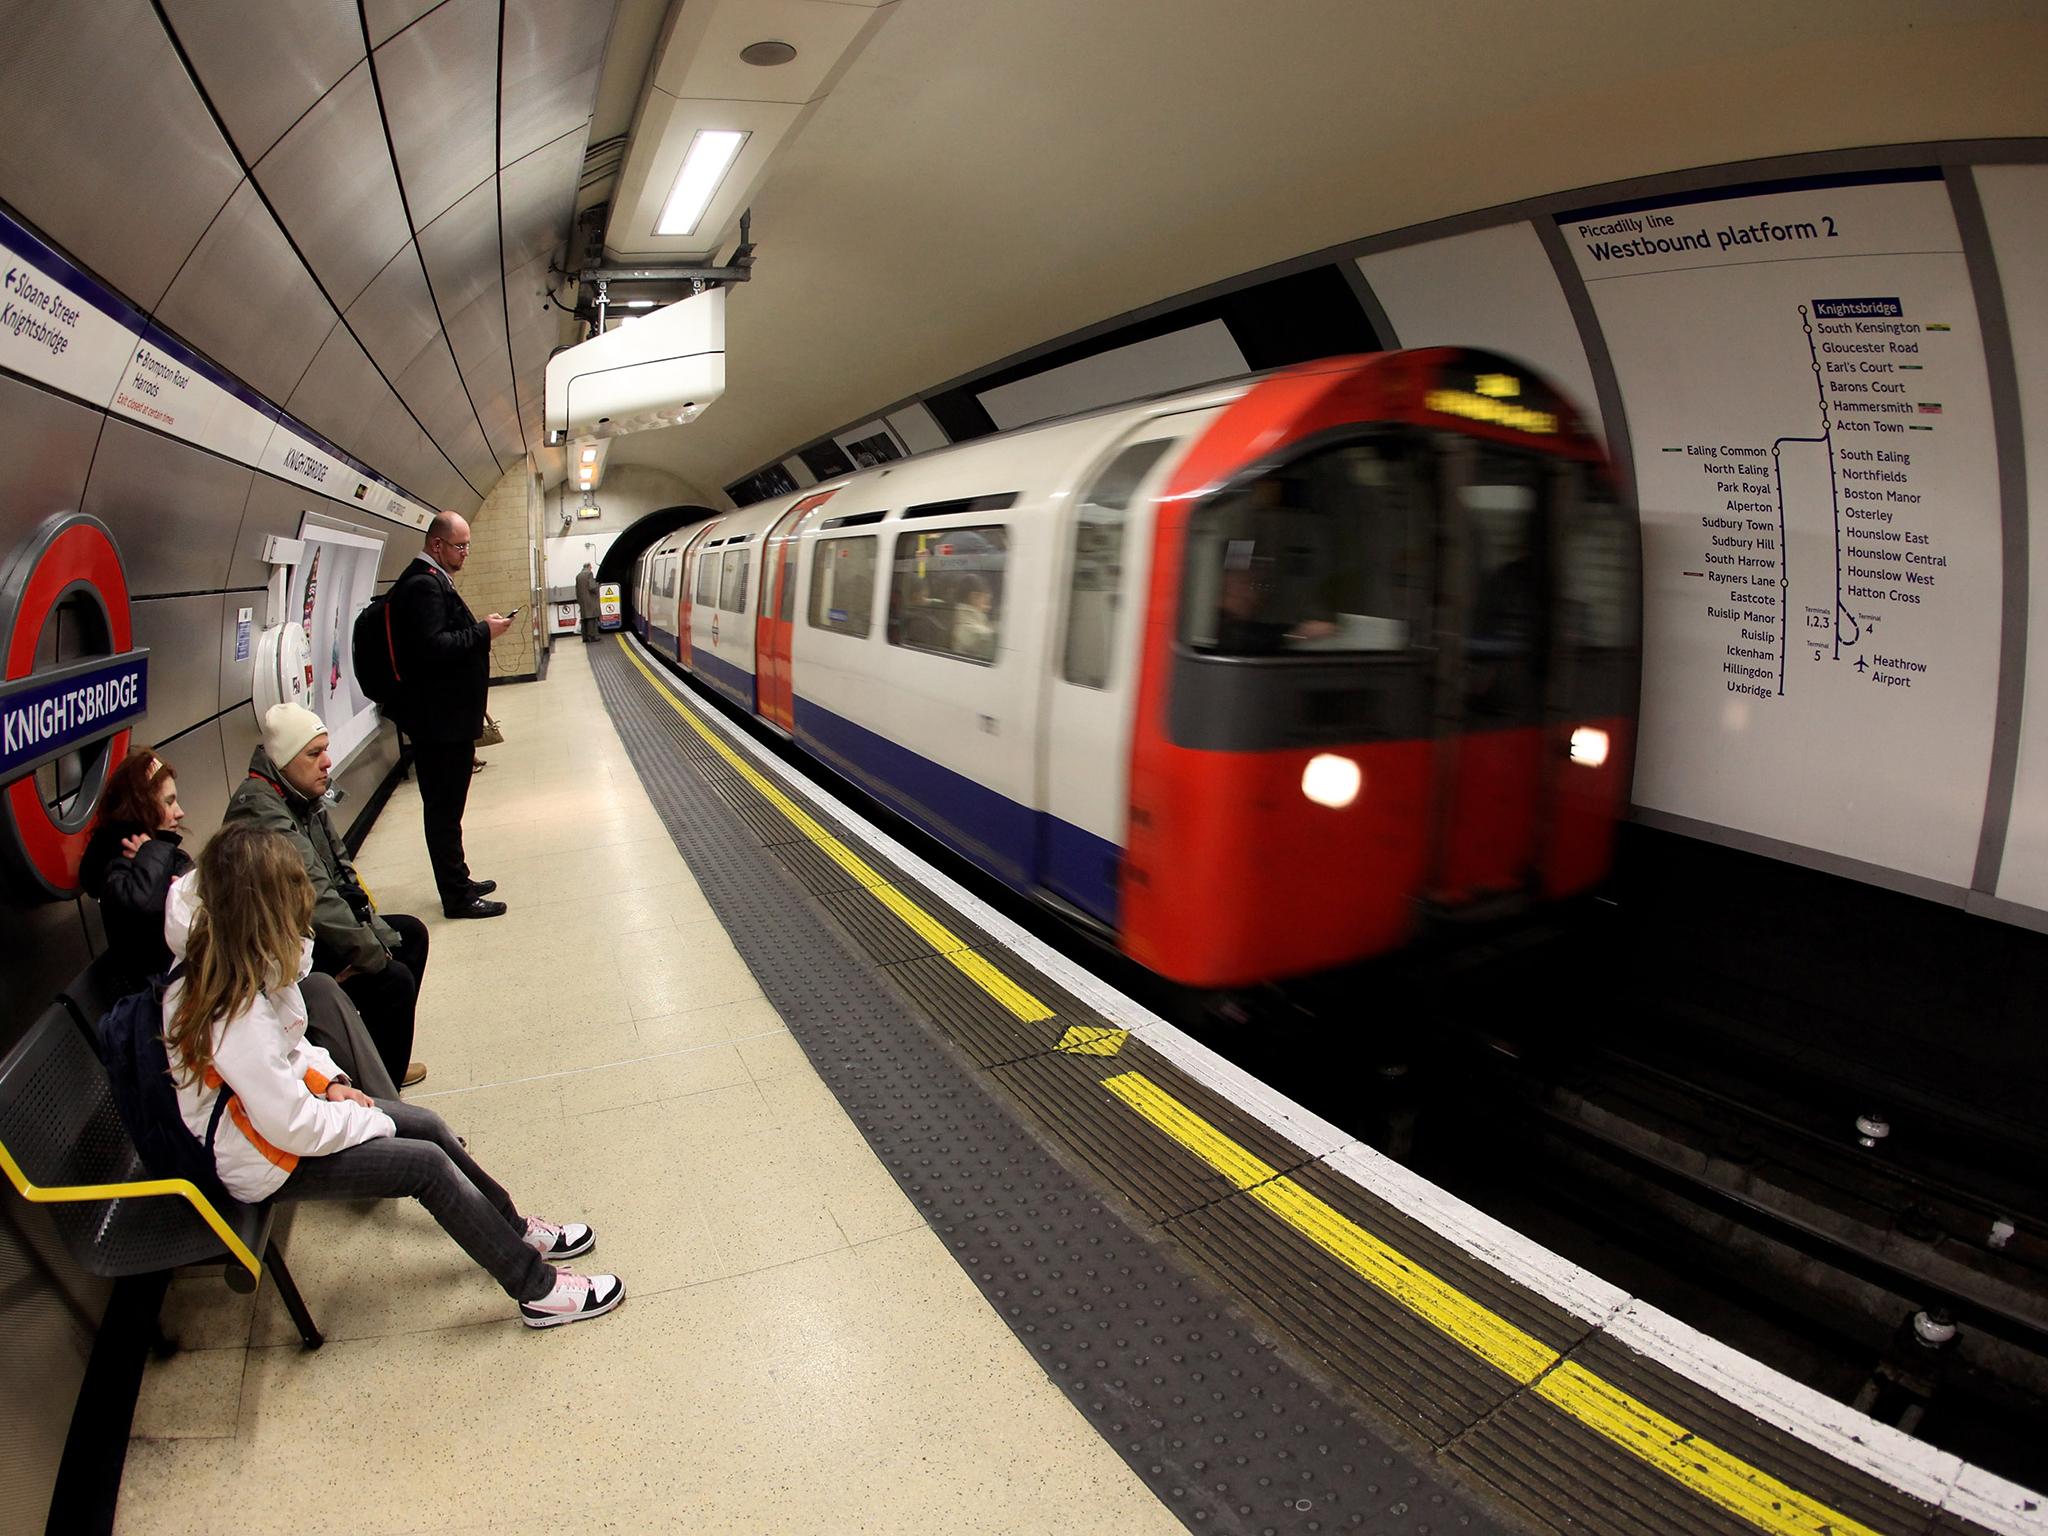 Strikes were expected on the Piccadilly Line